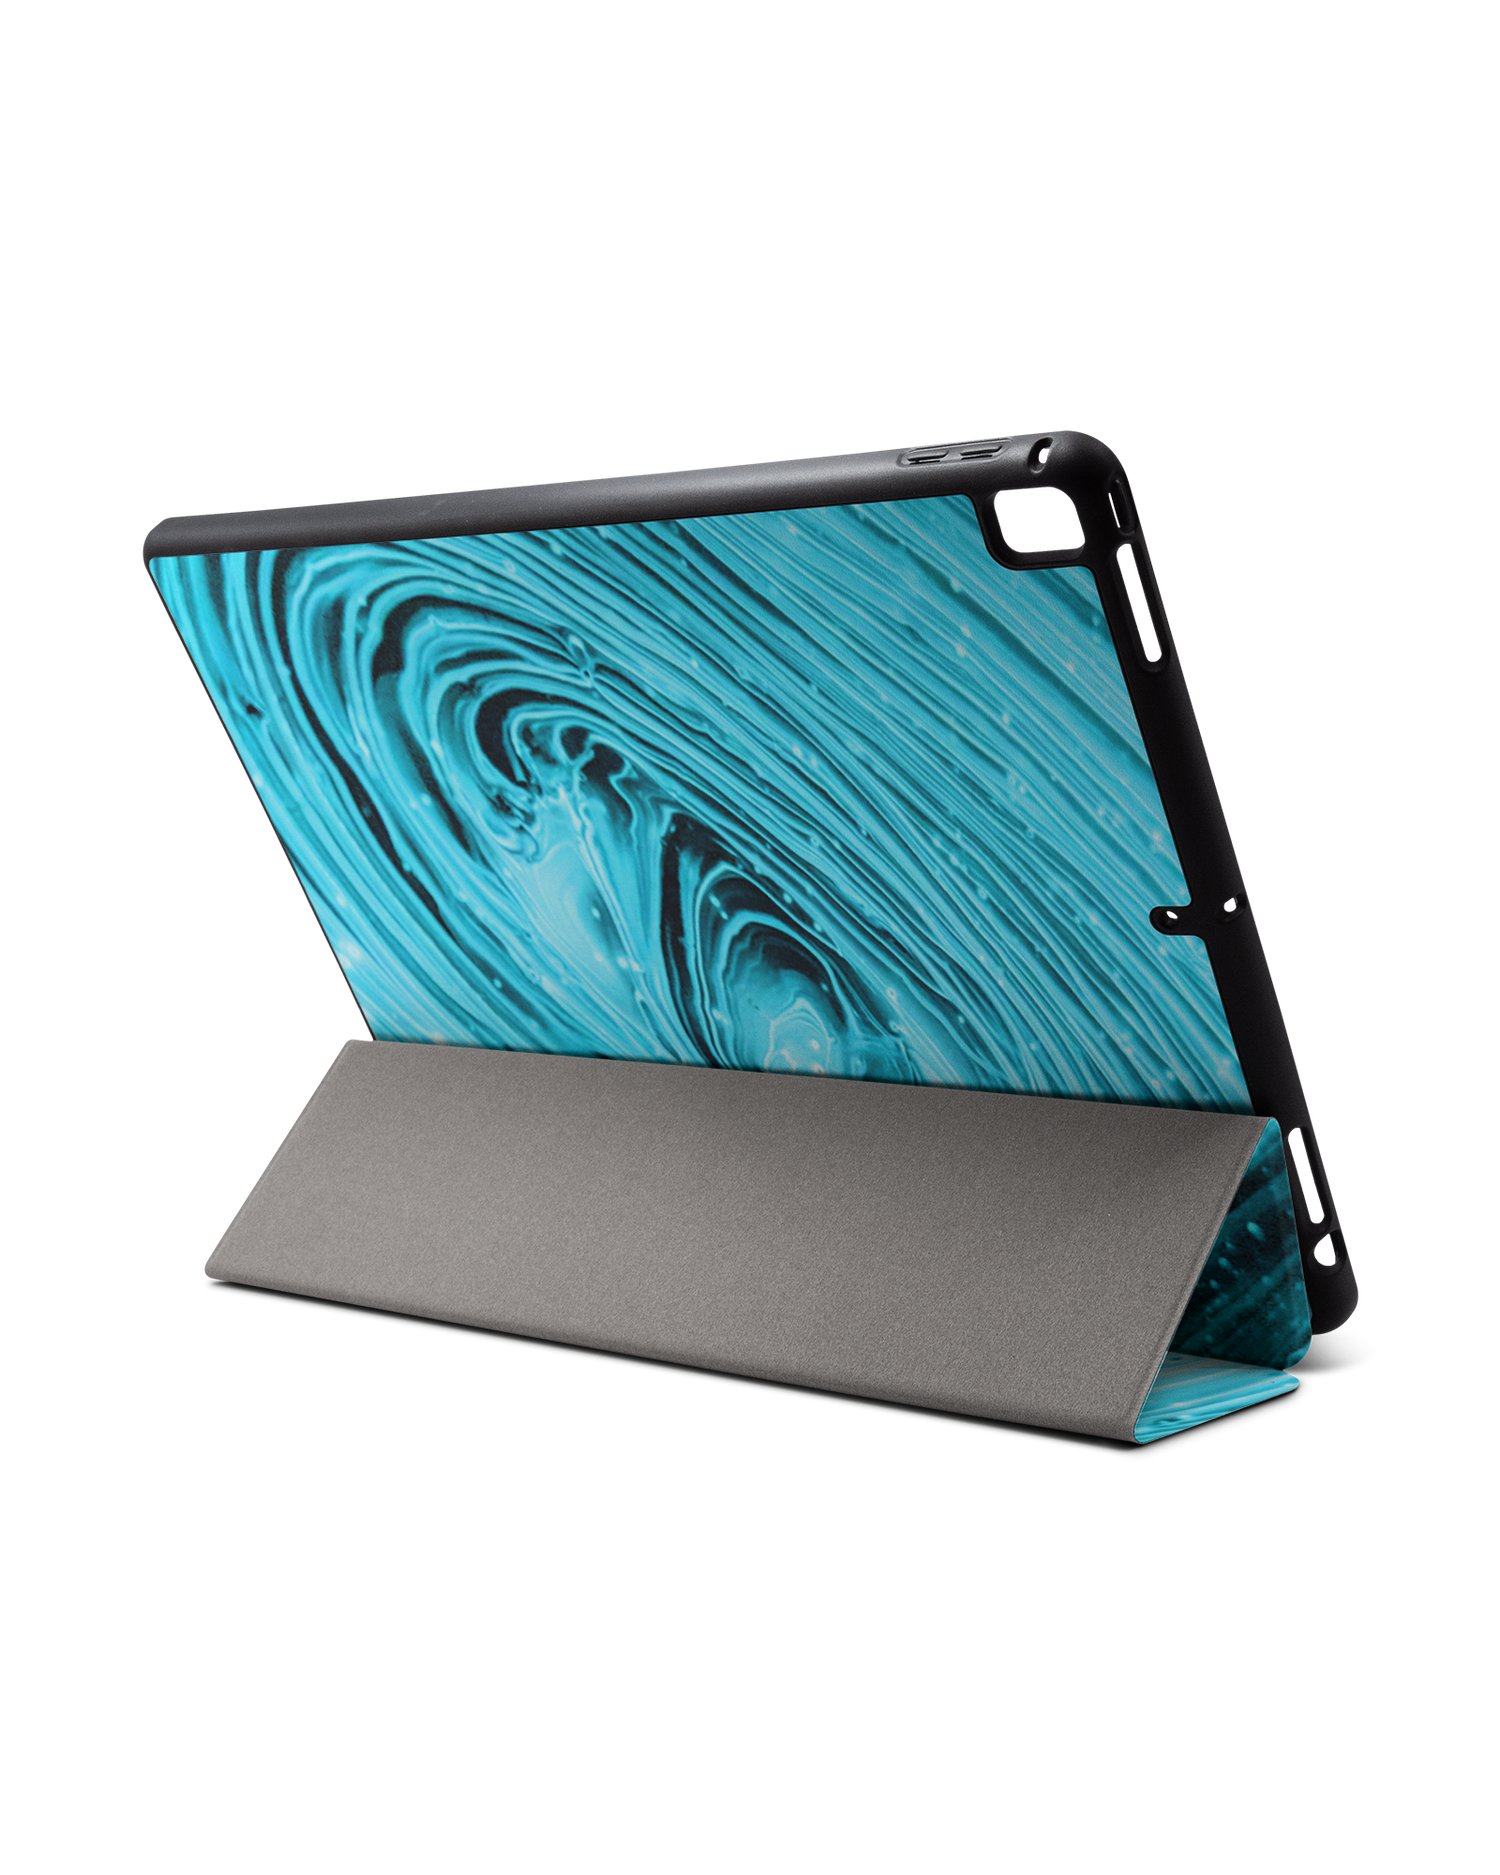 Turquoise Ripples iPad Case with Pencil Holder for Apple iPad Pro 2 12.9